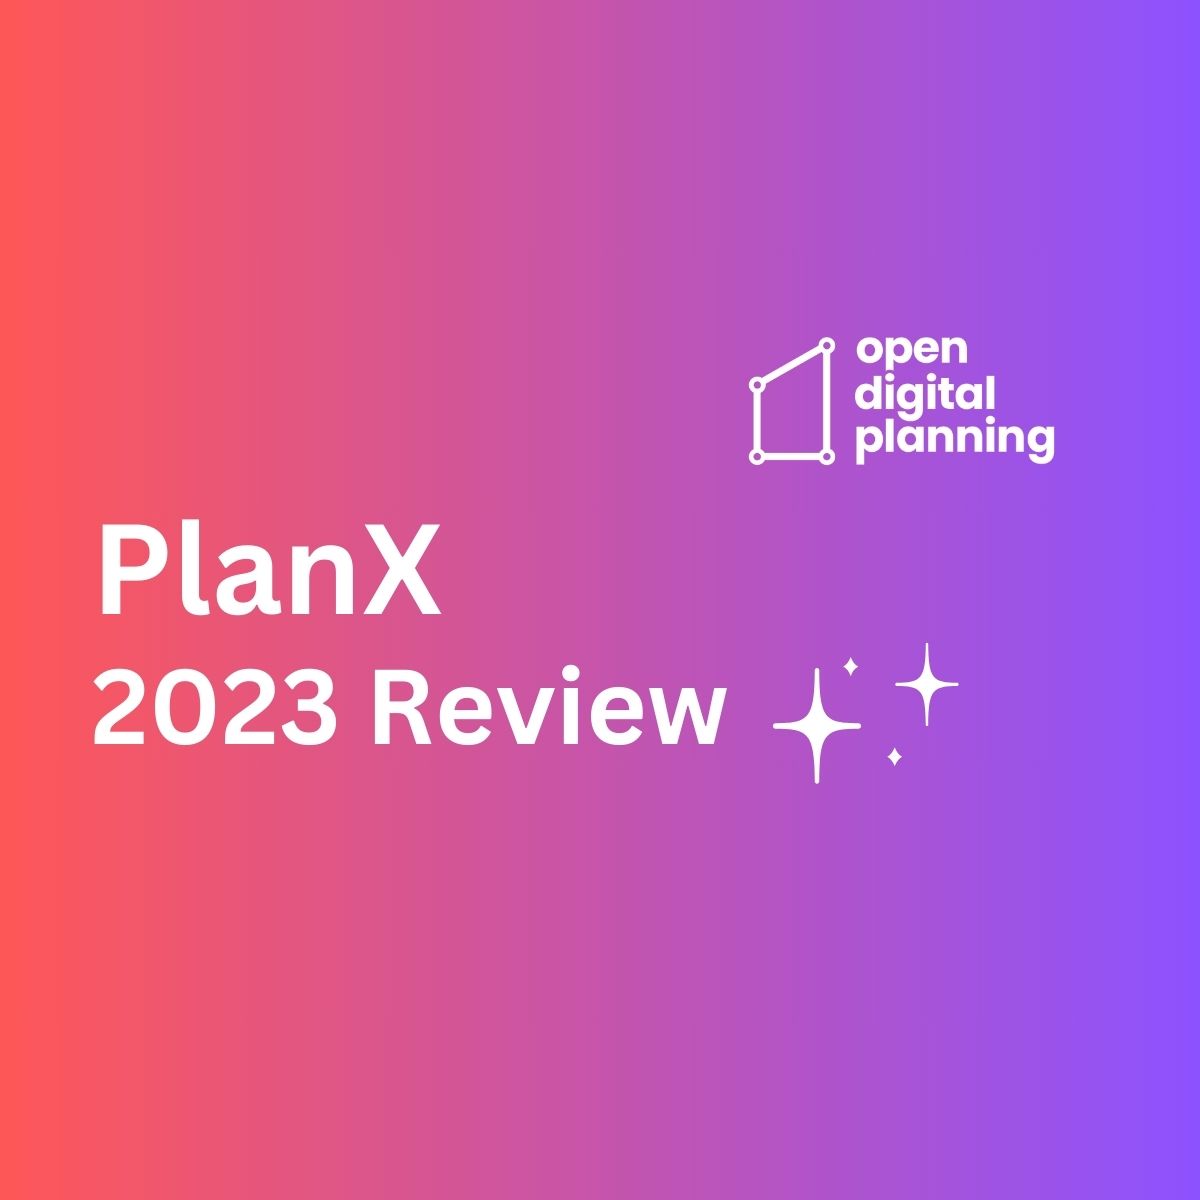 PlanX 2023 Review